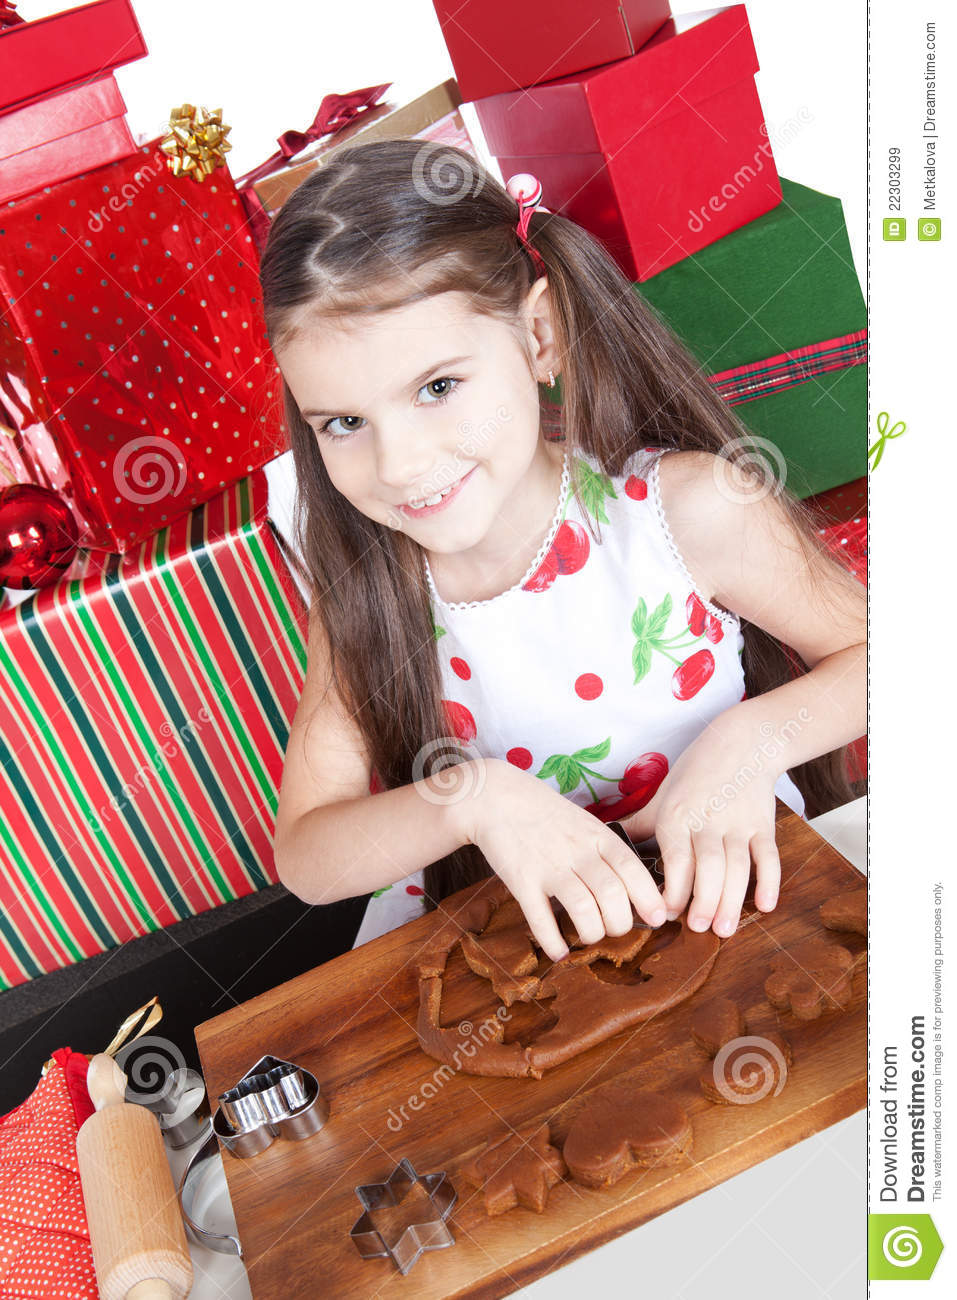 Little Girl Making Christmas Cookies Royalty Free Stock Images   Image